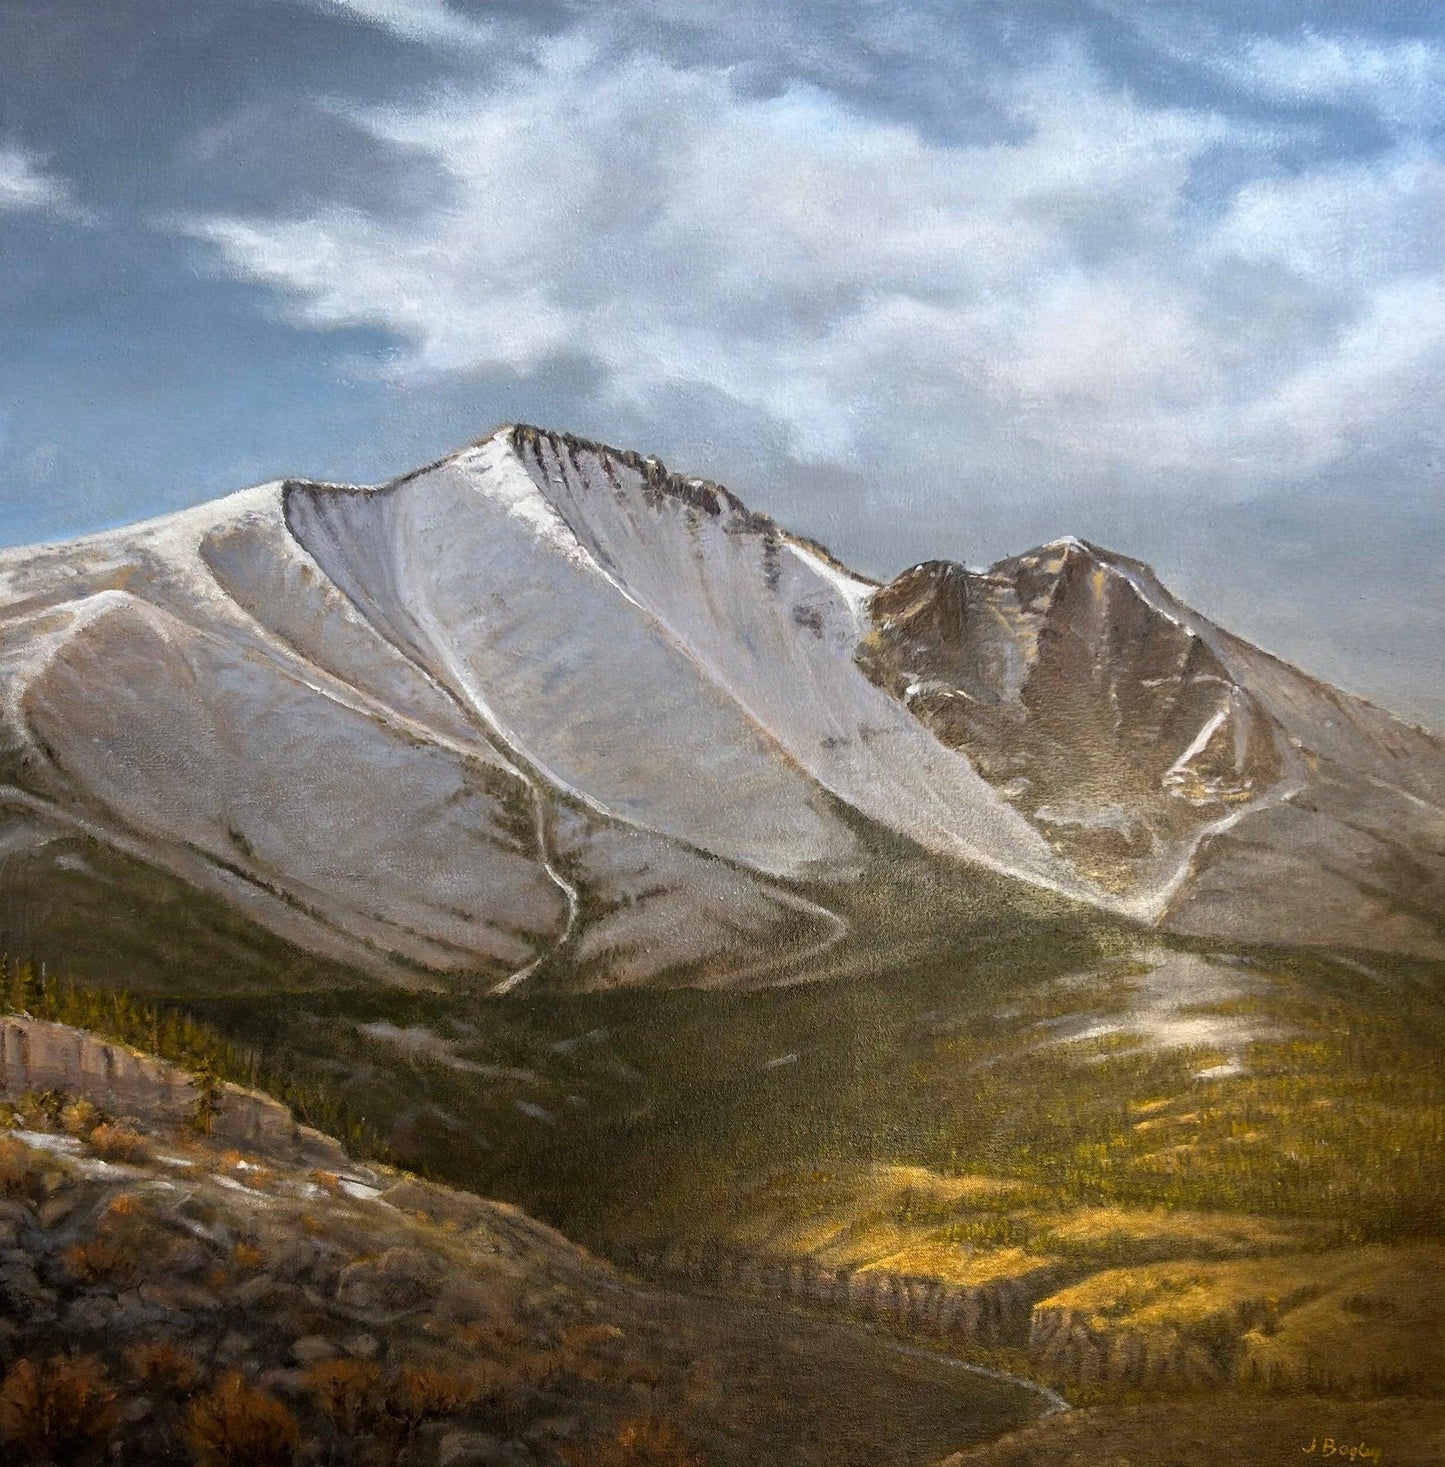 High Country Early Spring-Painting-Jim Bagley-Sorrel Sky Gallery